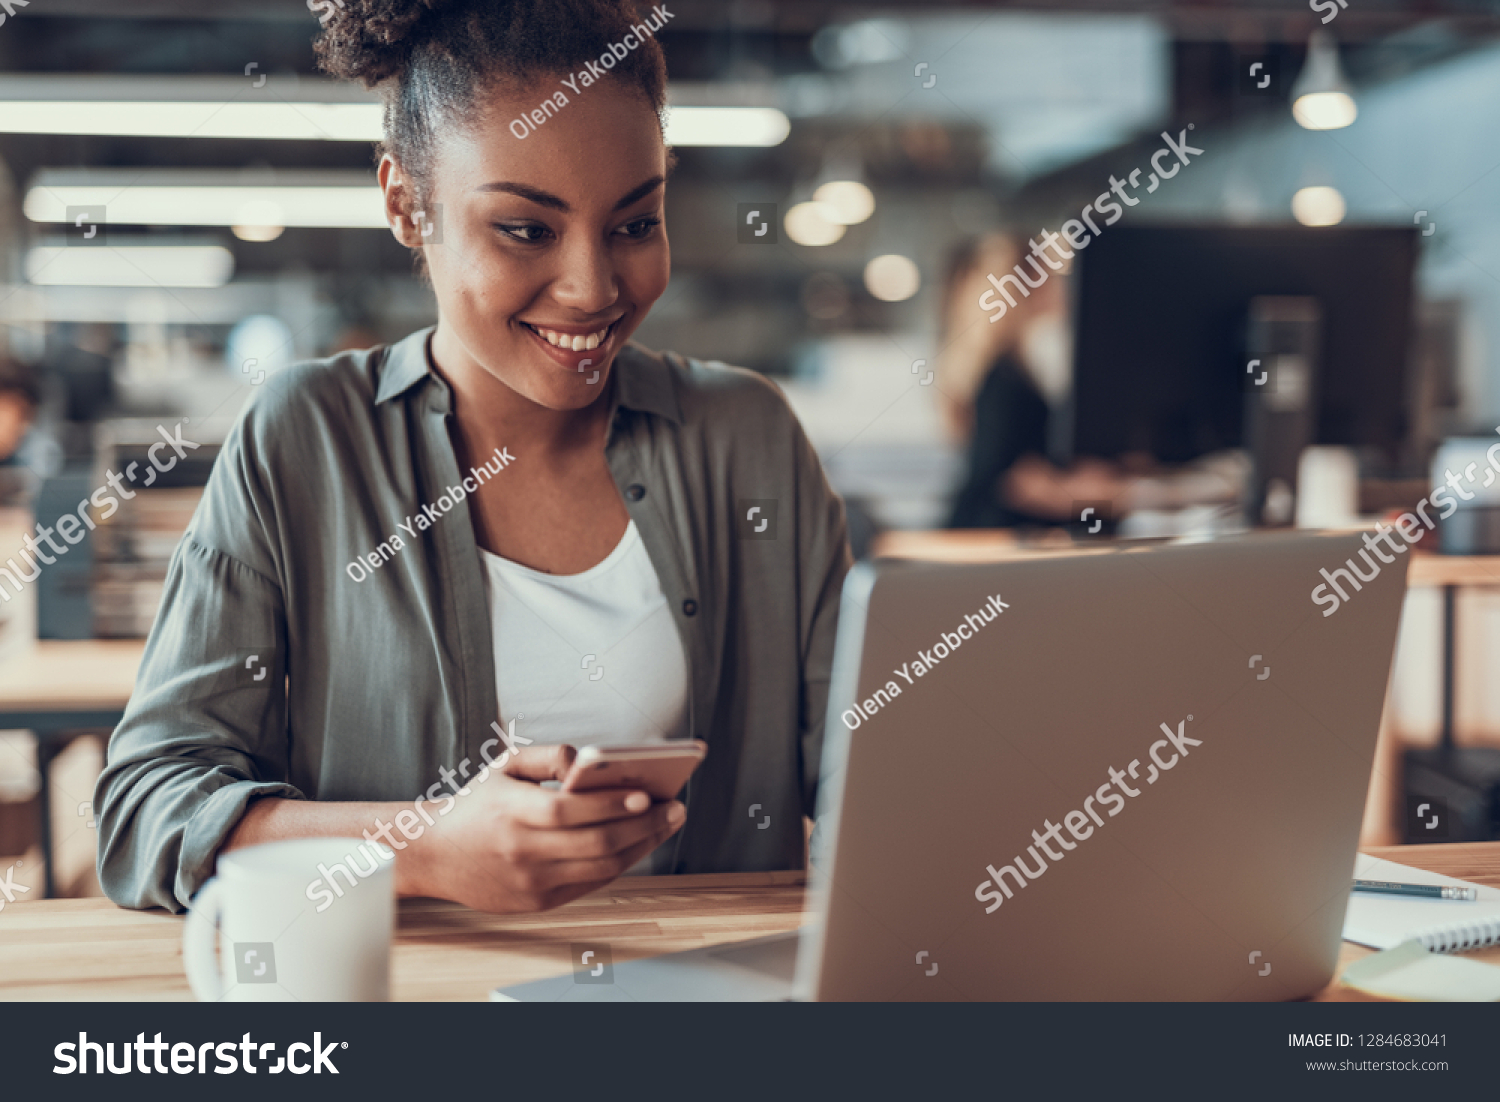 Portrait of charming young lady holding smartphone while looking at notebook display. She is sitting at wooden table and smiling #1284683041